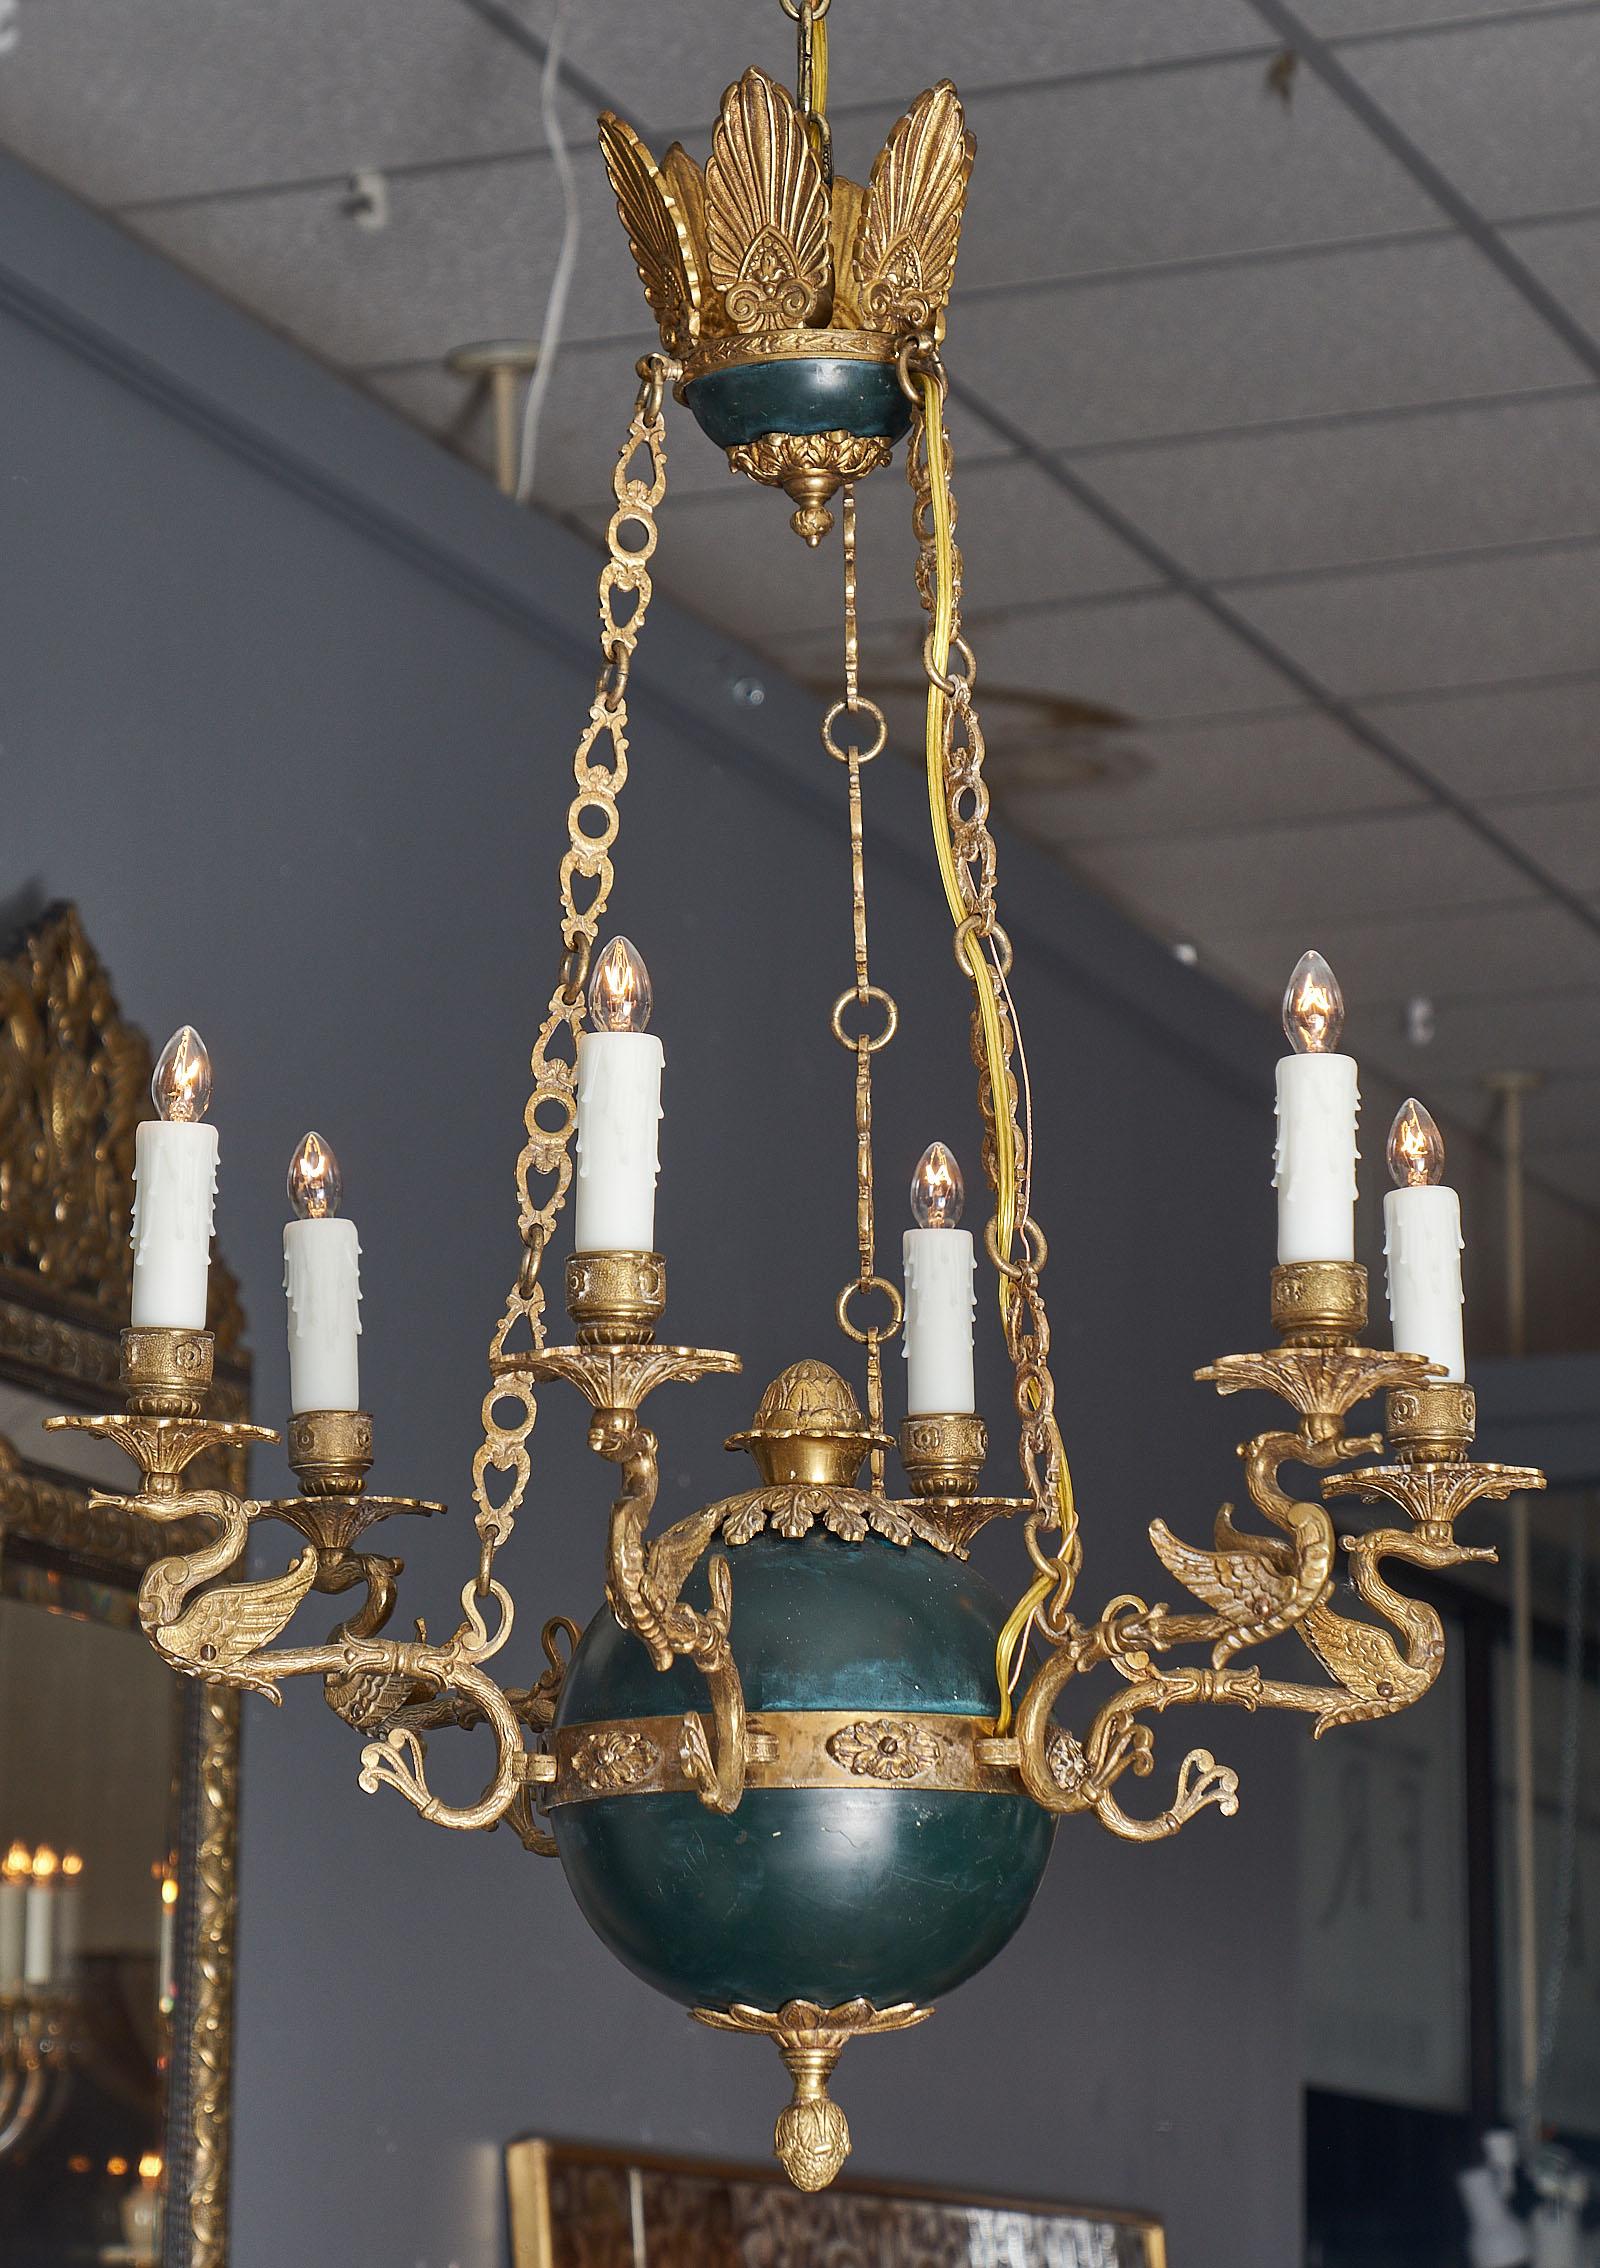 A fine French Empire swan chandelier featuring six branches of finely cast gilded bronze shaped as swans. The rich bronze decor of acorns and acanthus is found throughout. The center body of the chandelier is made of tole. This chandelier has been